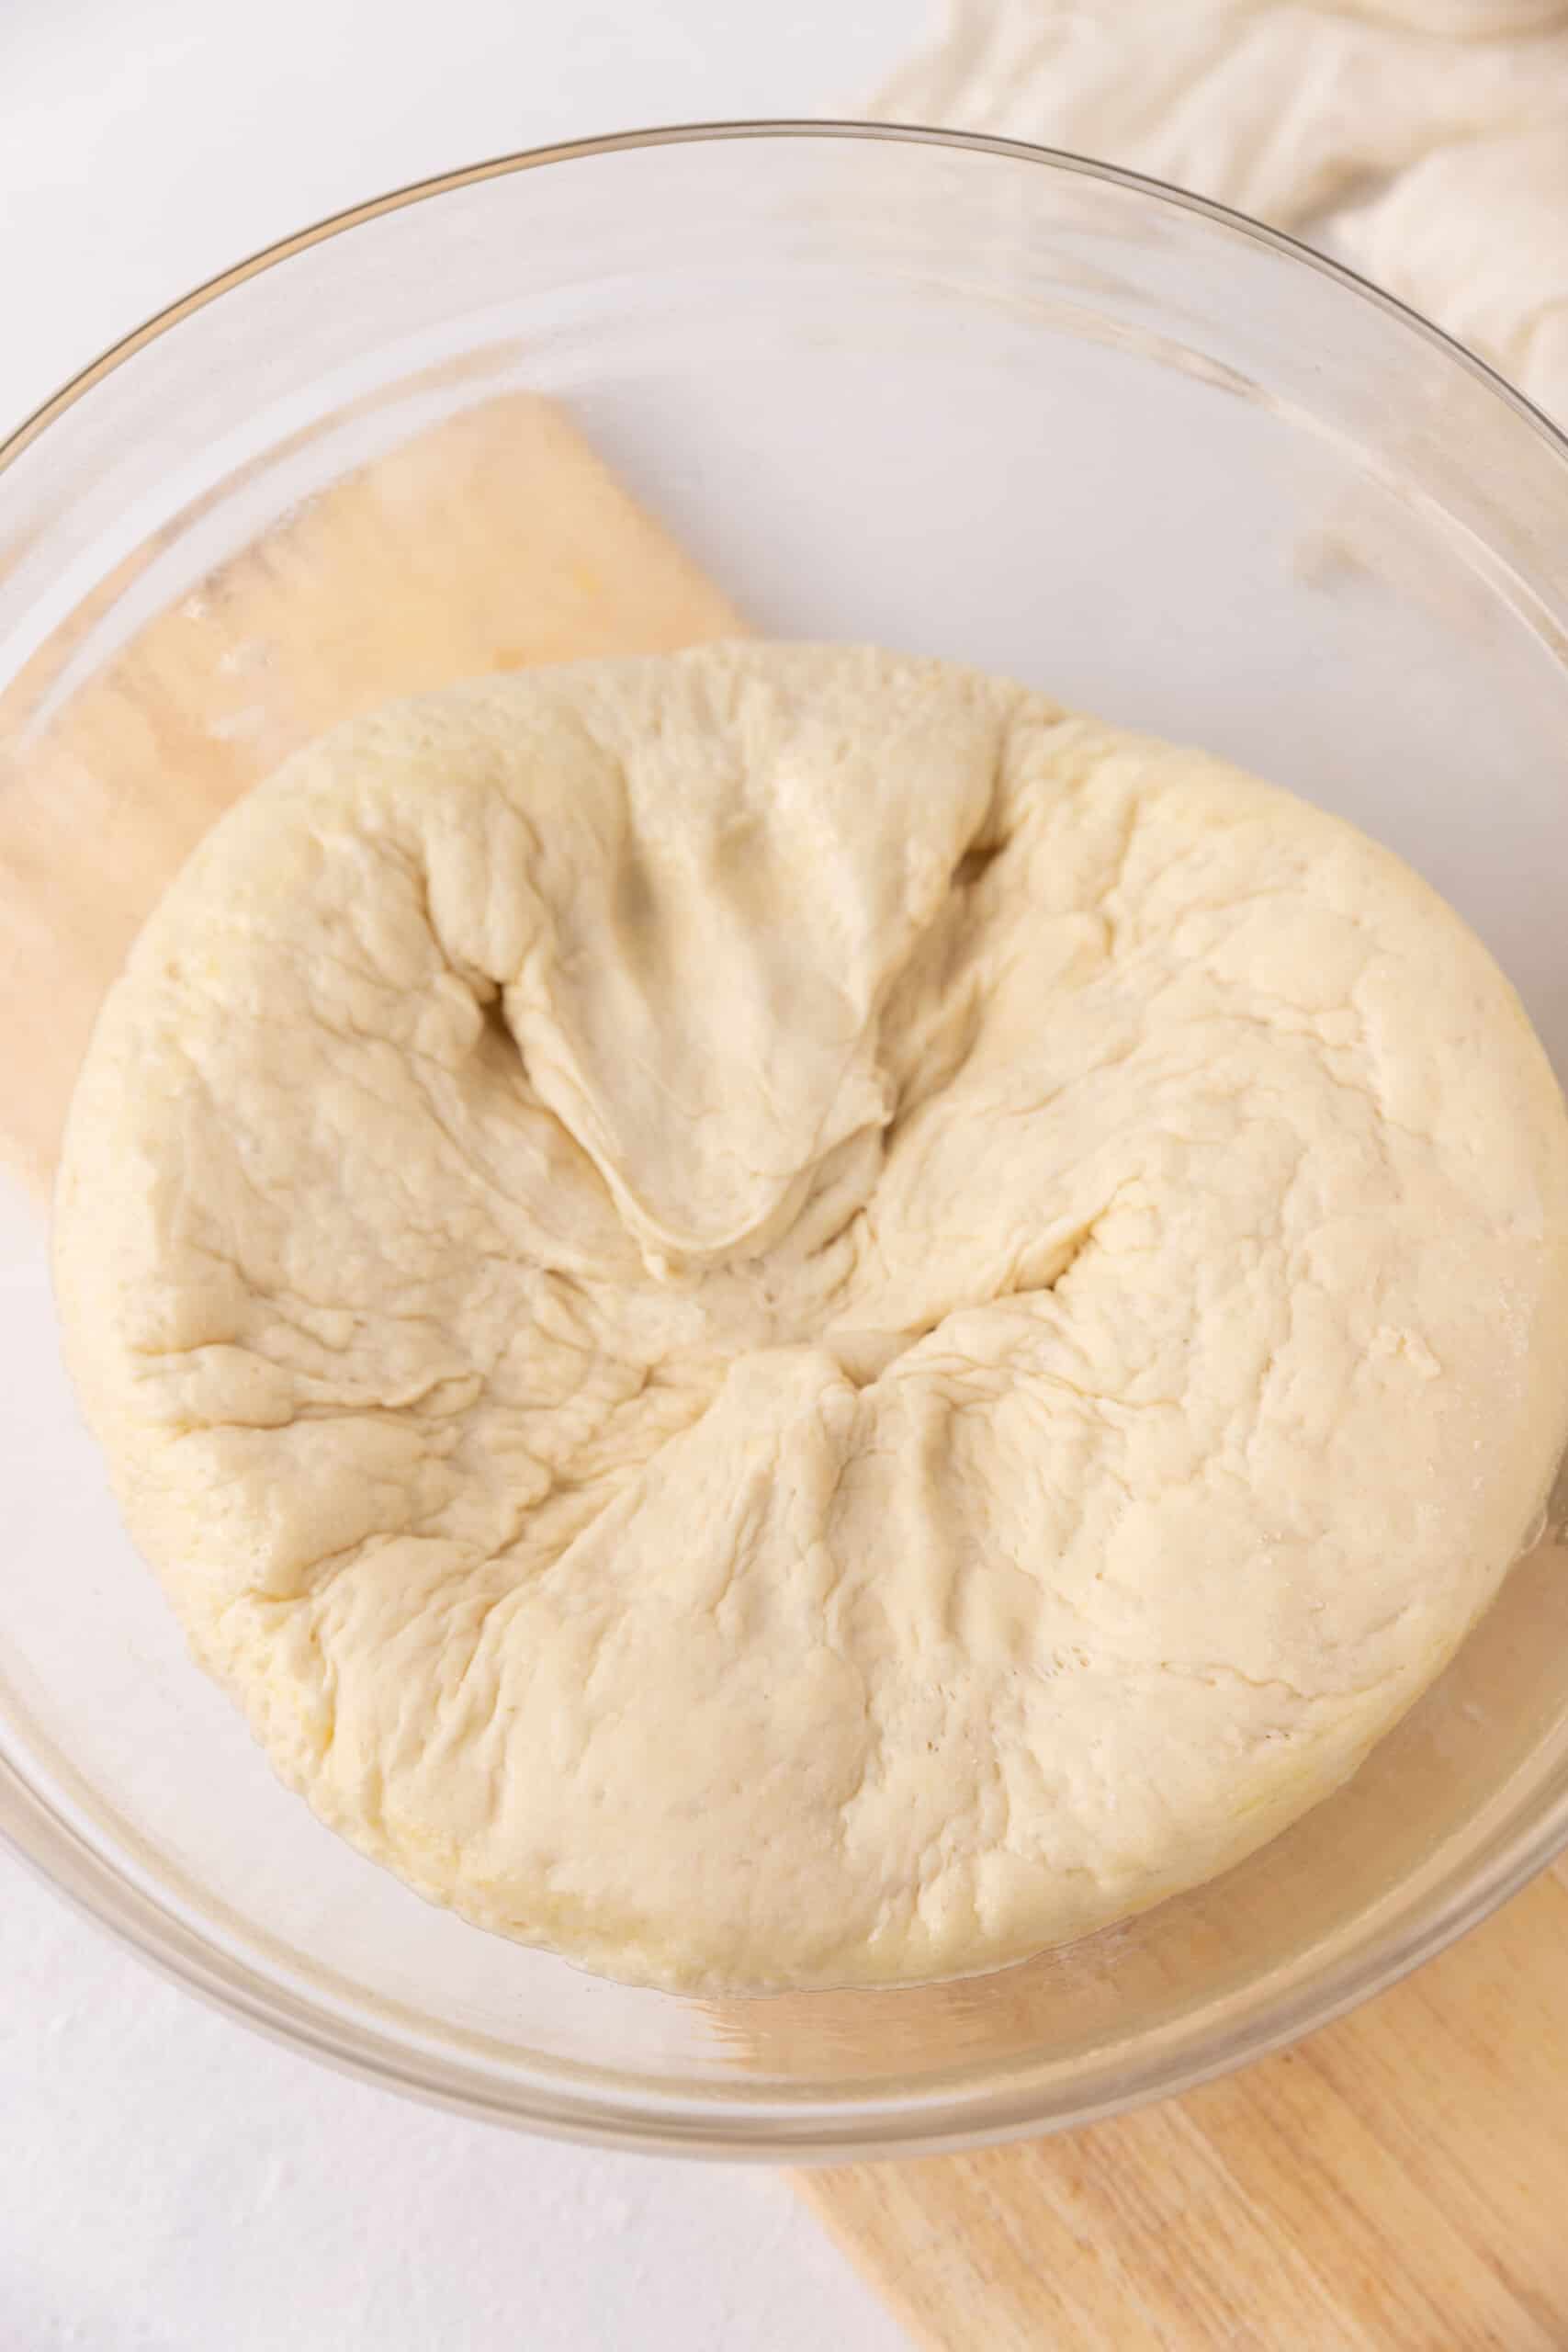 Punched down bread dough.